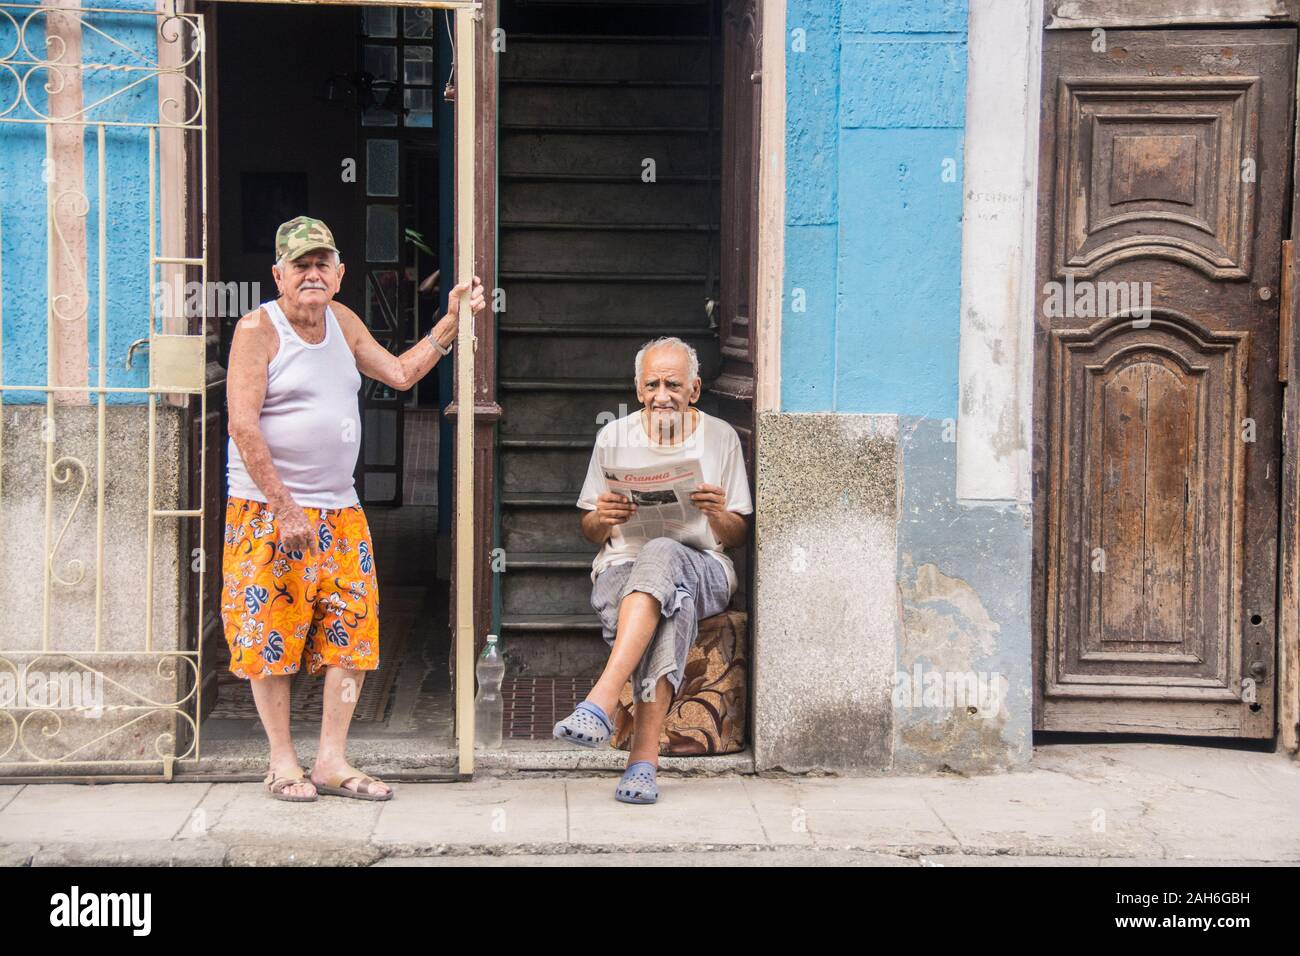 People of Havana Series - Cuban neighbors outside their respective homes, getting together to talk and socialize. Stock Photo